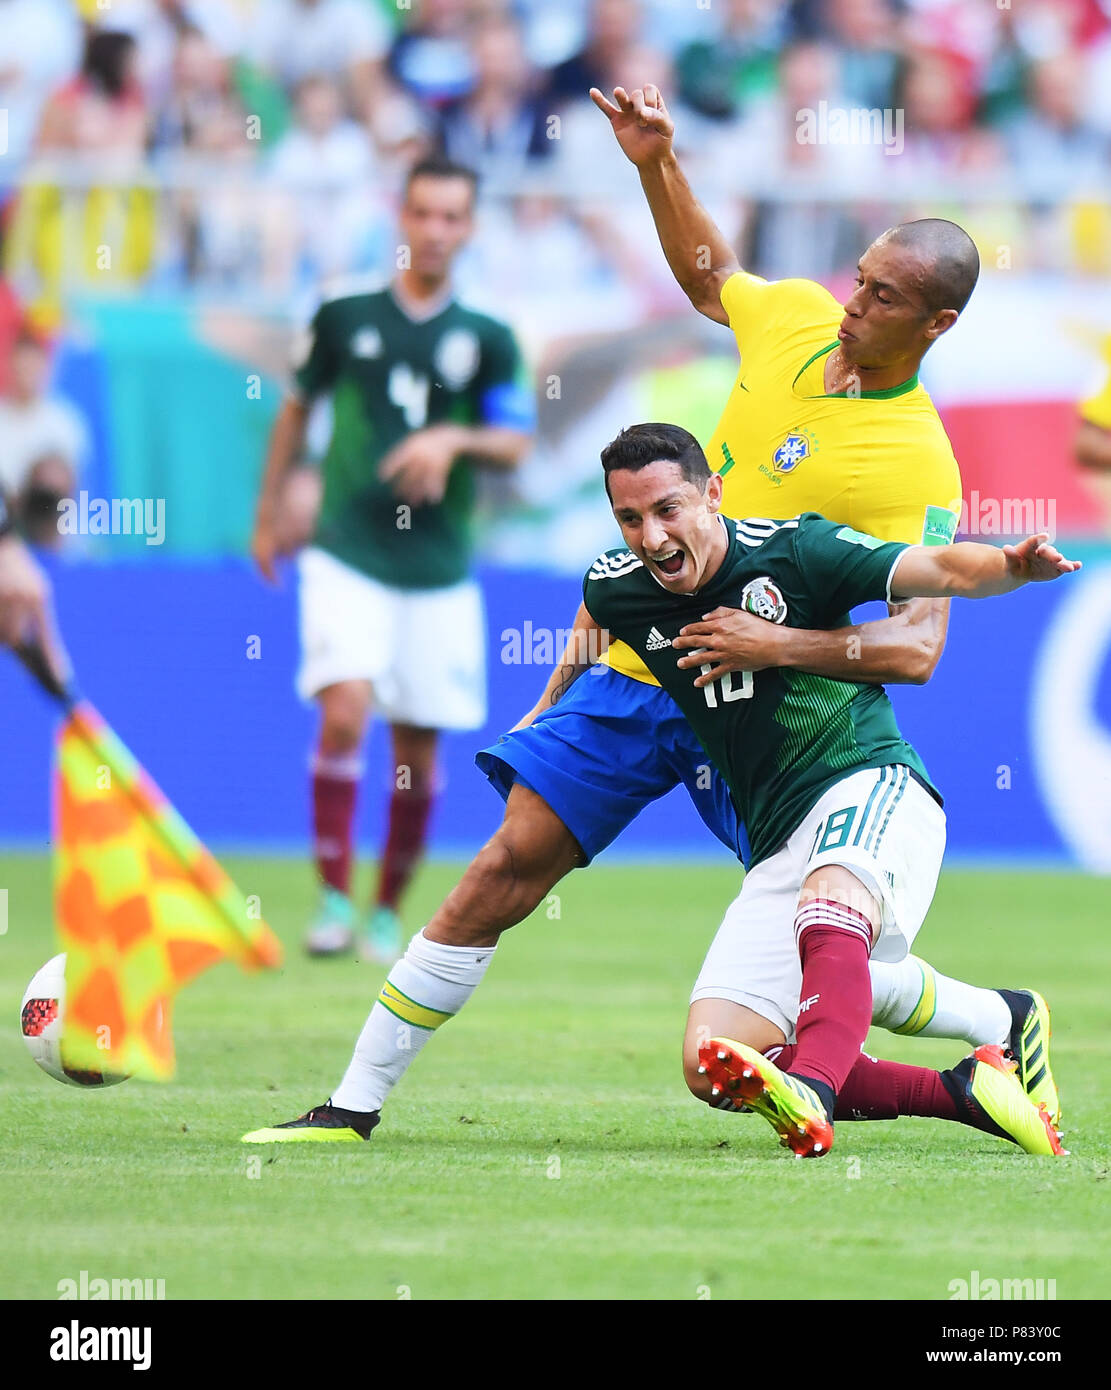 SAMARA, RUSSIA - JULY 02: Miranda of Brazil competes with Andres Guardado of Mexico during the 2018 FIFA World Cup Russia Round of 16 match between Brazil and Mexico at Samara Arena on July 2, 2018 in Samara, Russia. (Photo by Lukasz Laskowski/PressFocus/MB Media) Stock Photo